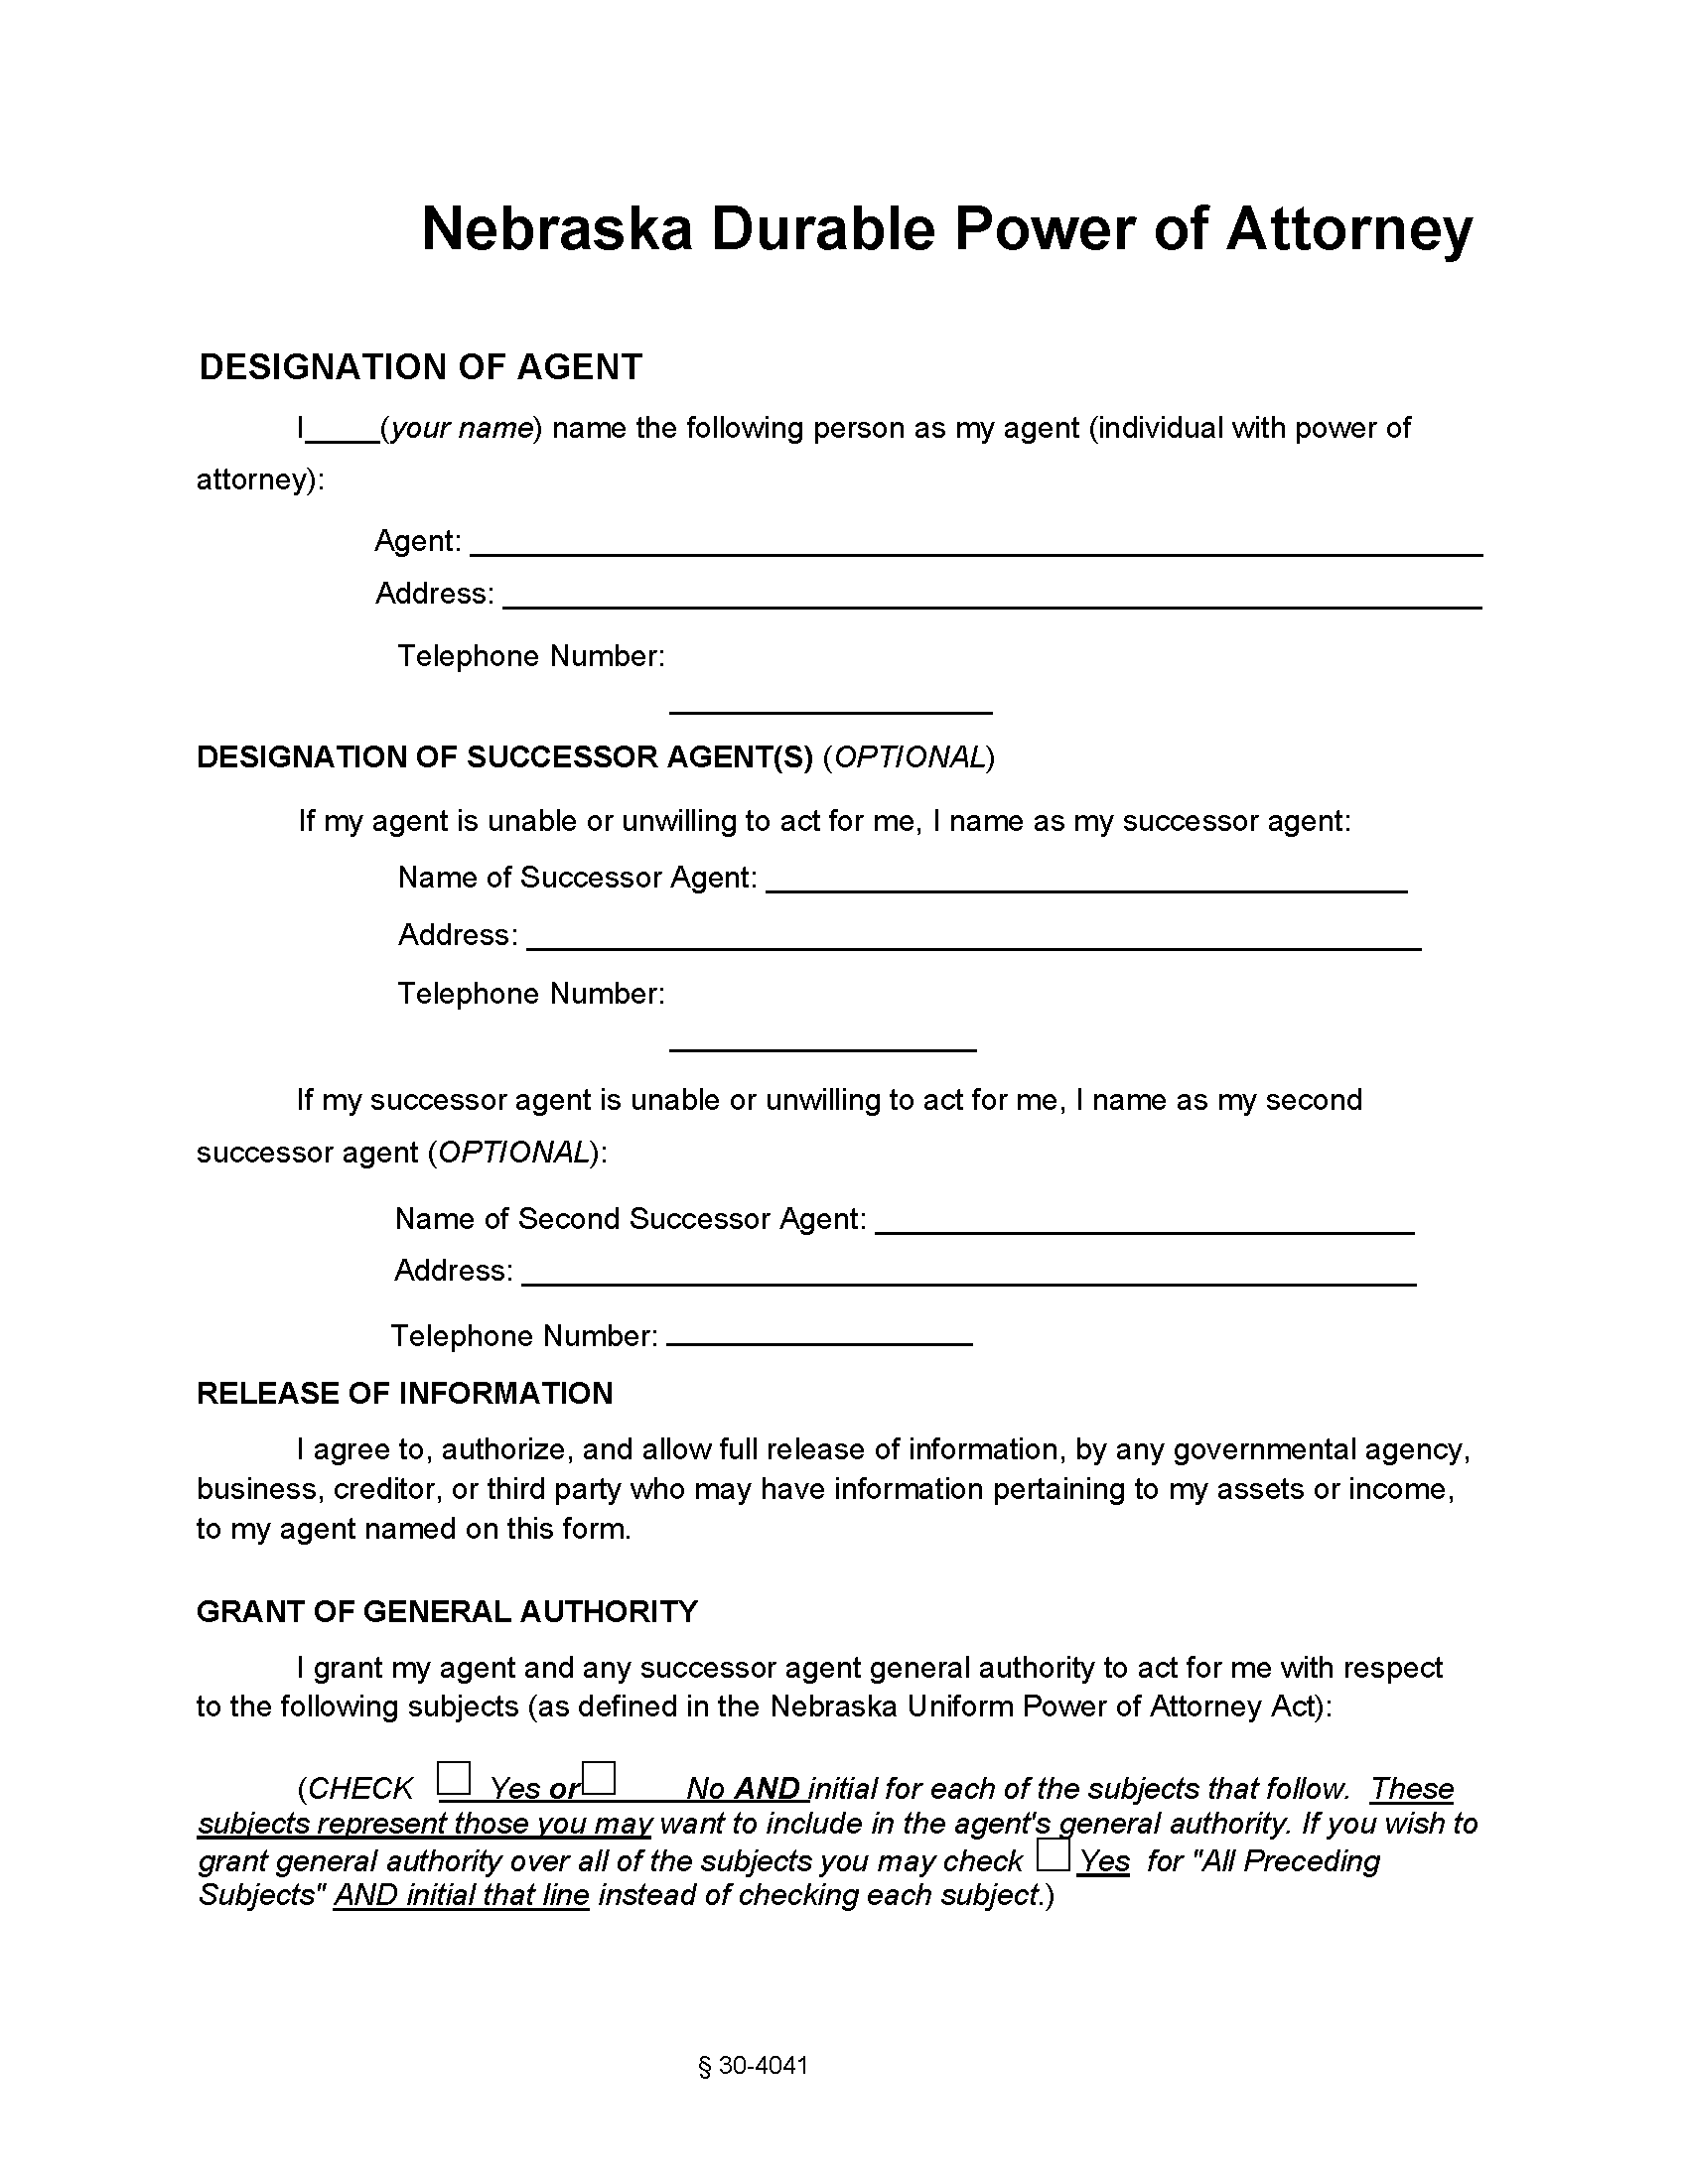 Nebraska Durable Power Of Attorney Form Free Printable Legal Forms